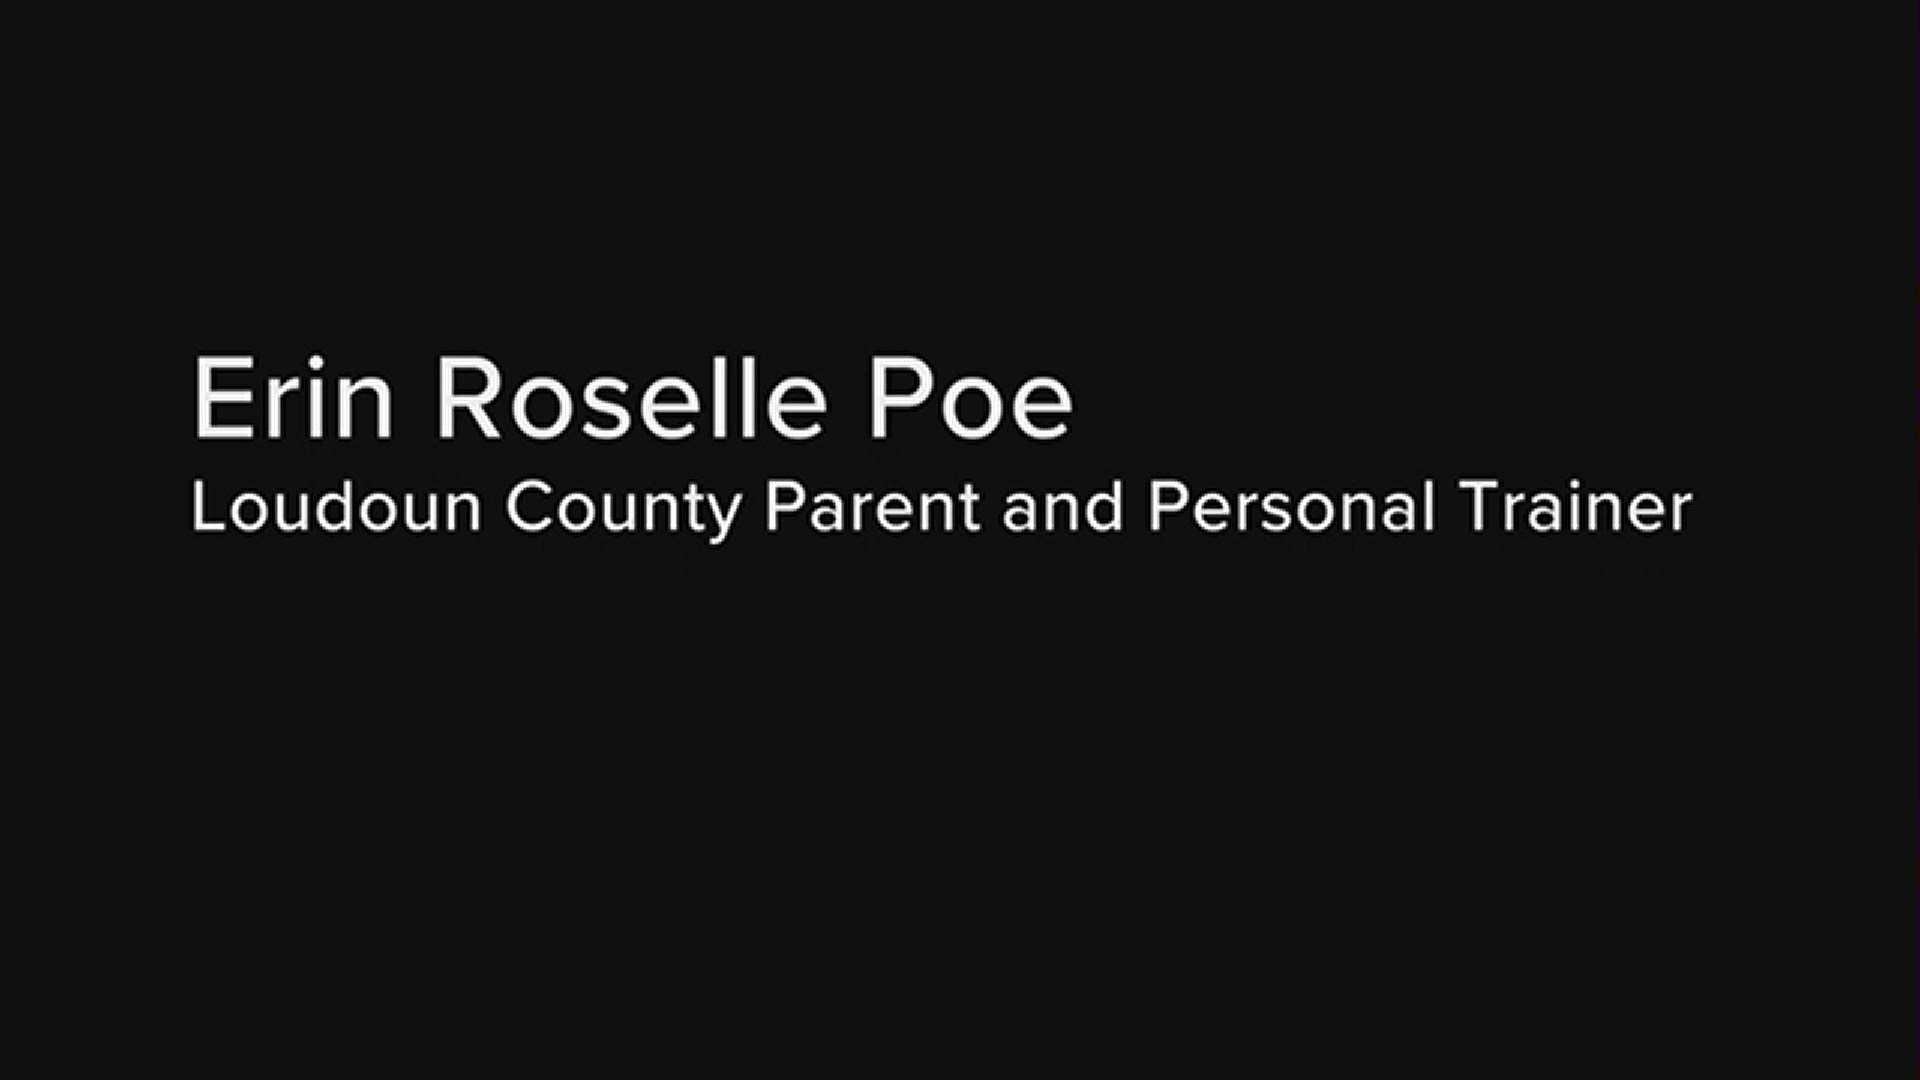 Loudoun County personal trainer Erin Roselle Poe shares some of her concerns about the potential for physical inactivity among kids under the virtual learning model.